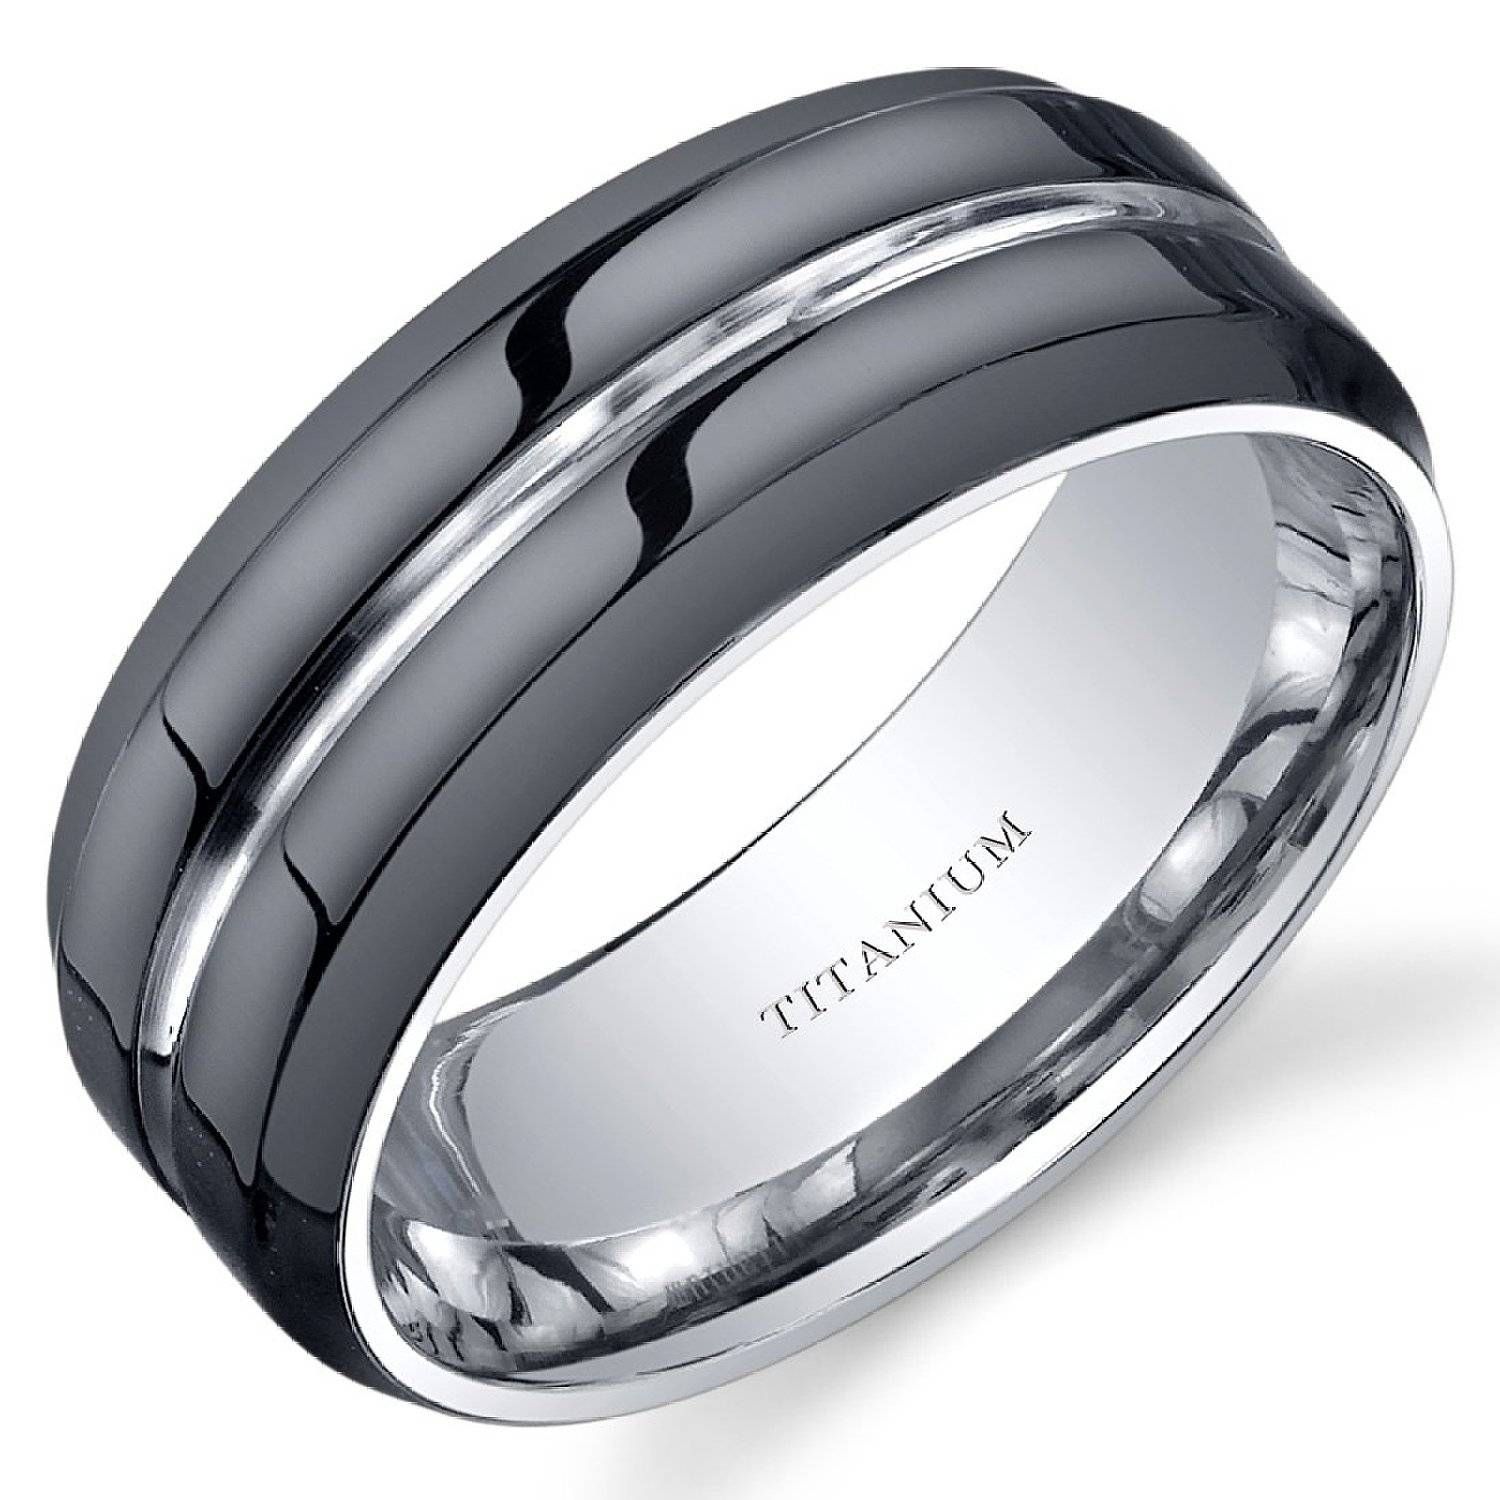 Cheap Male Wedding Rings Tags : Weddings Rings For Men Inexpensive Intended For Guys Wedding Bands (Photo 277 of 339)